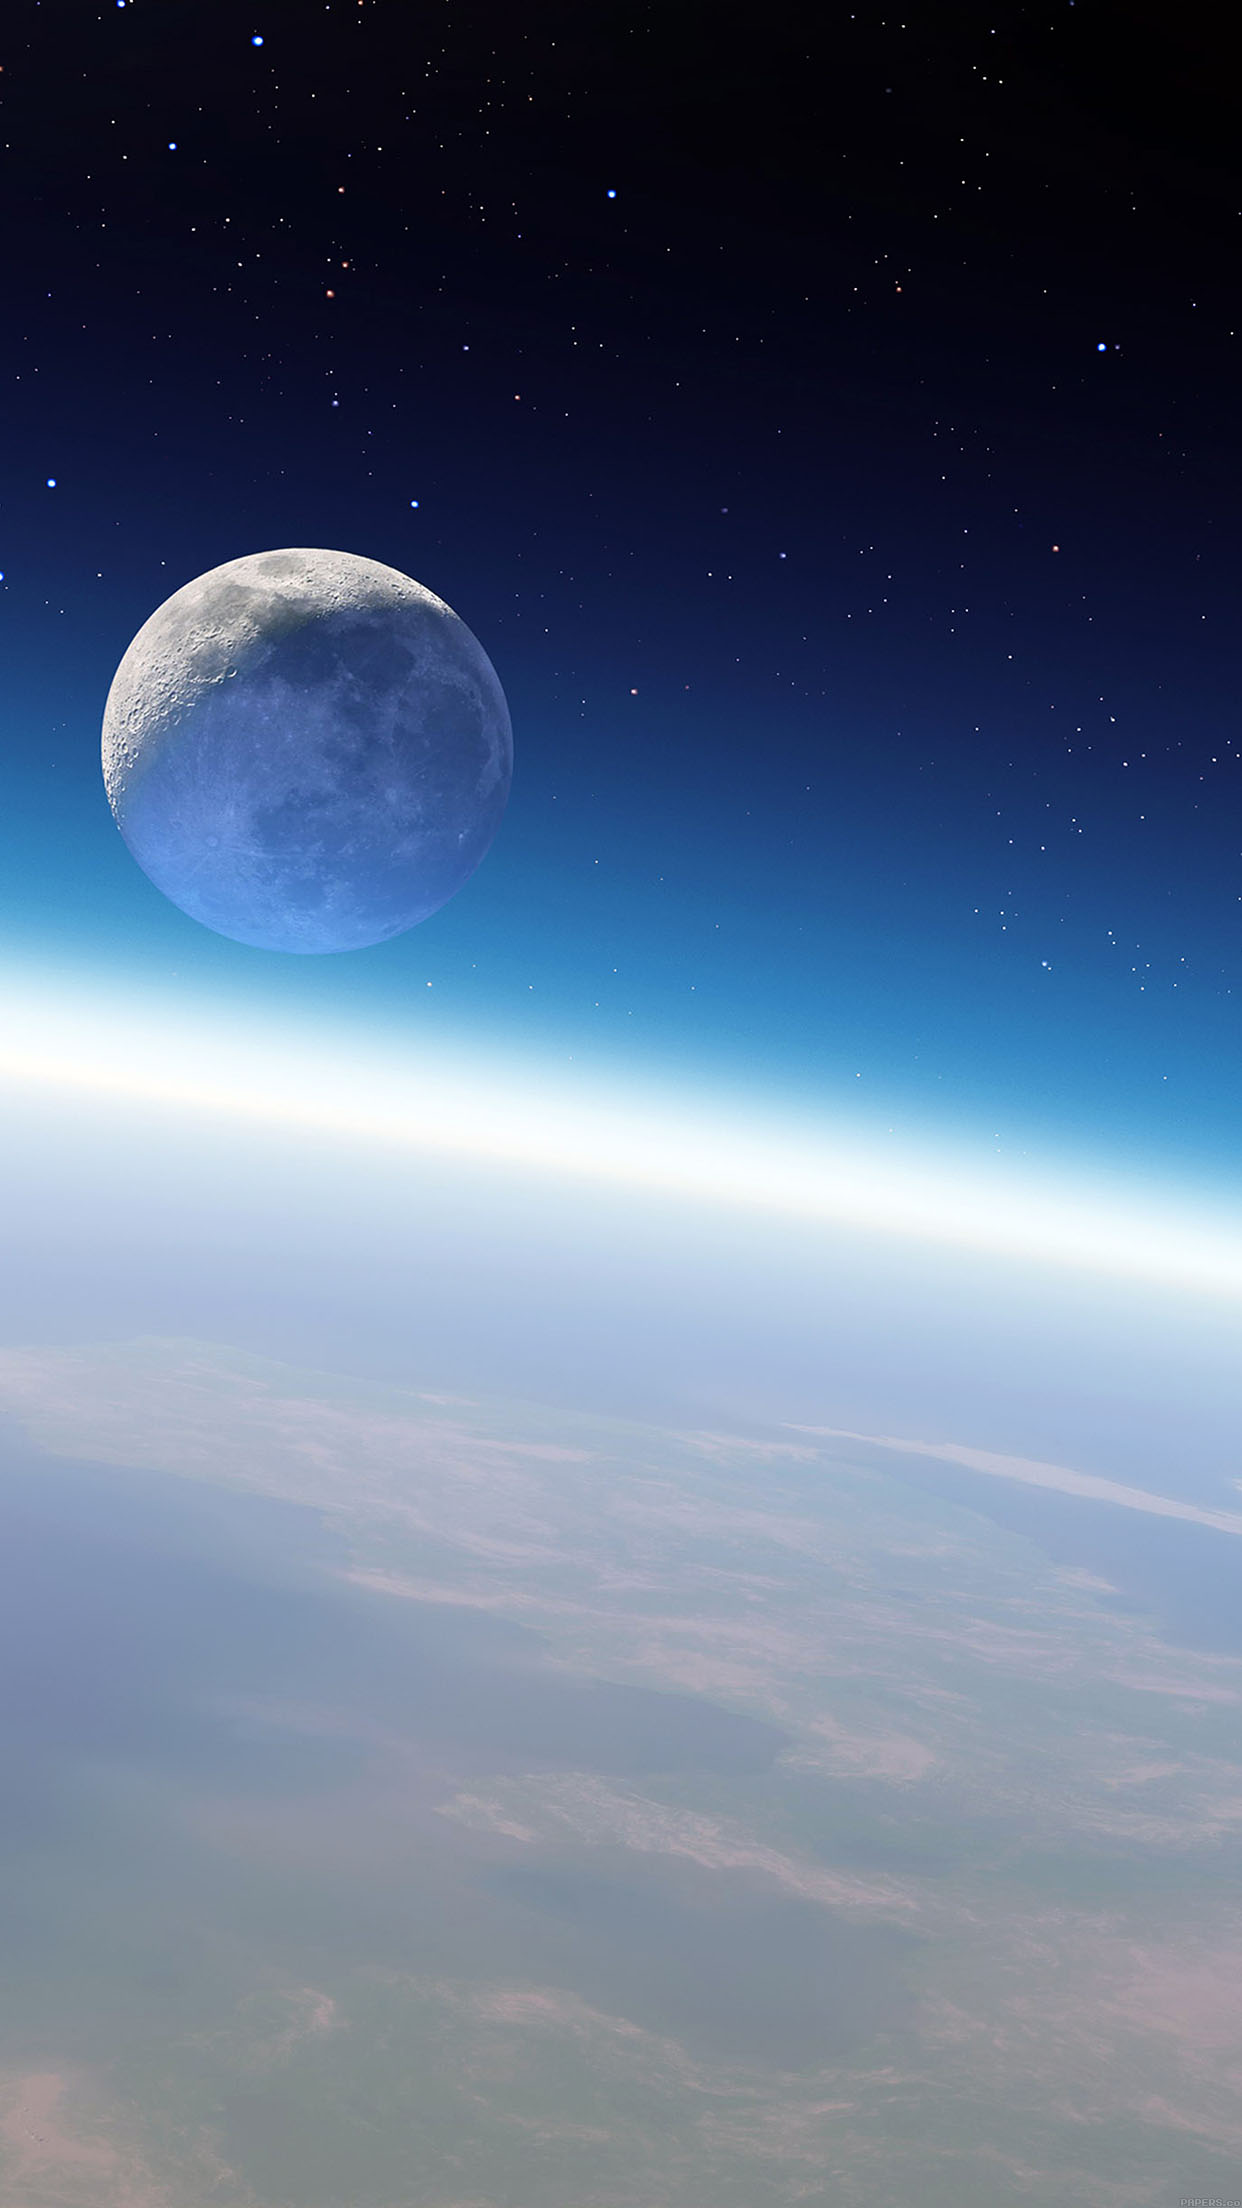 Wallpaper Earth And Moon Space Android wallpaper